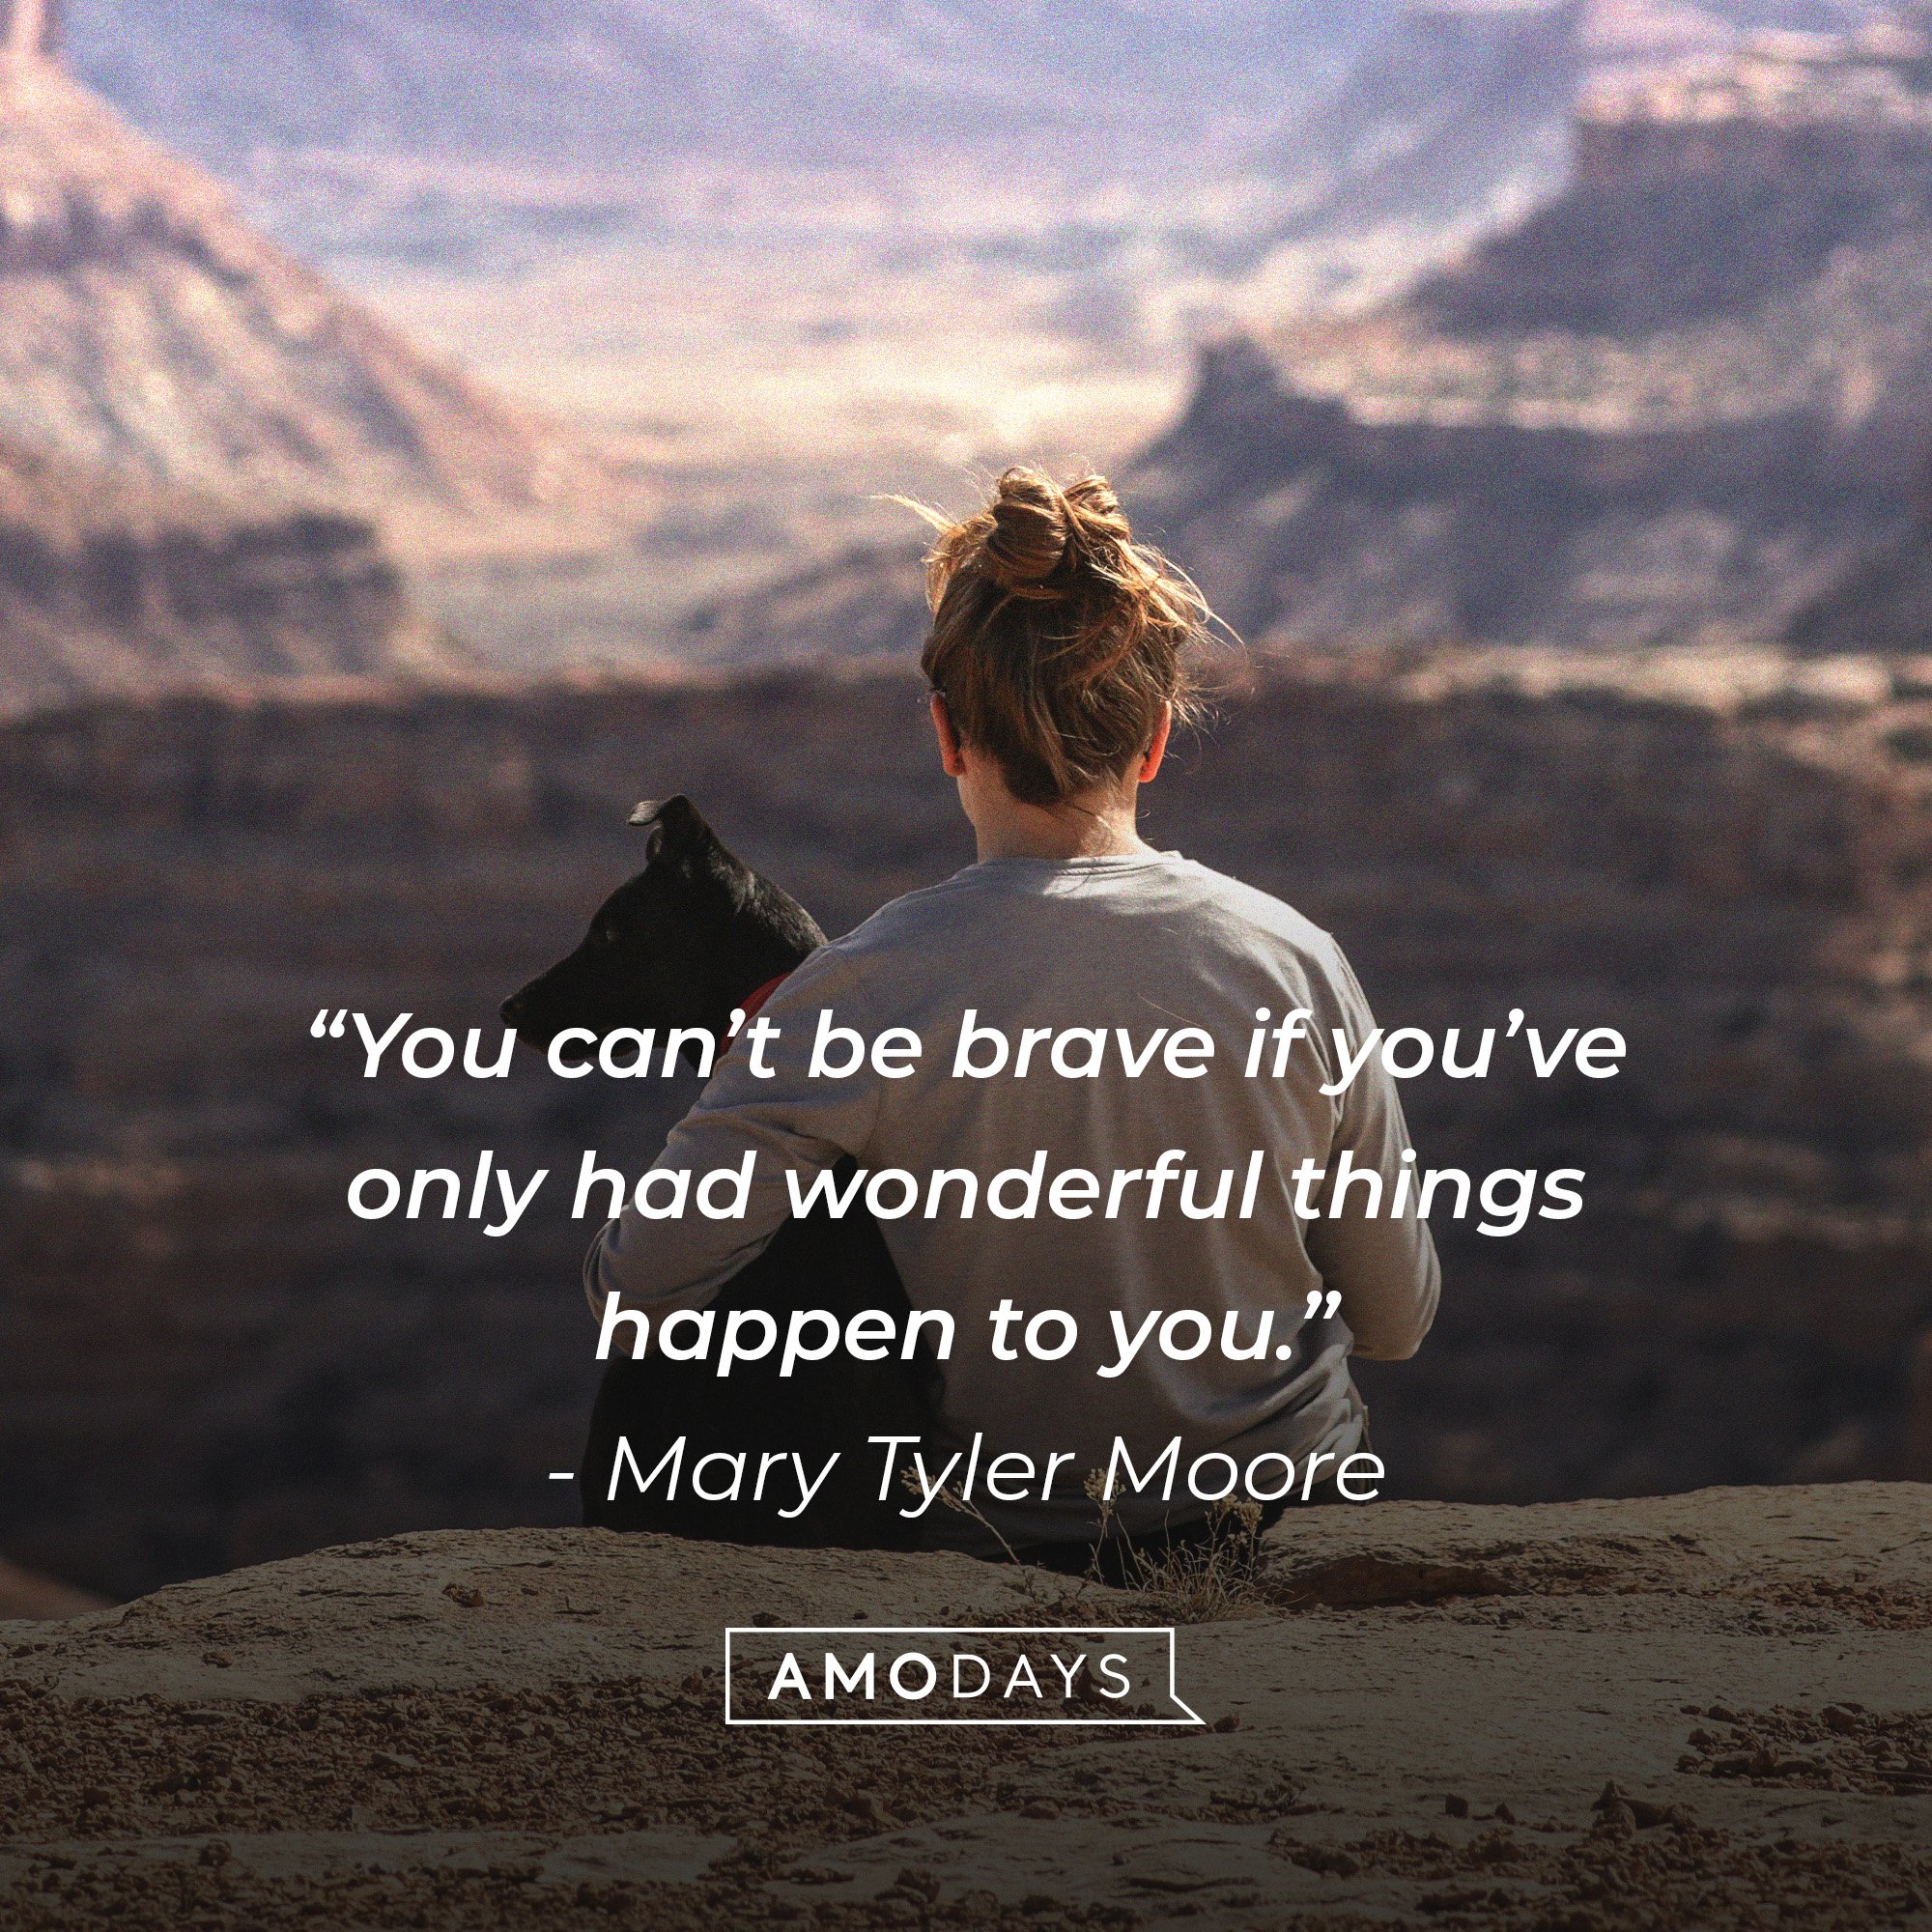 Mary Tyler Moore's quote: “You can’t be brave if you’ve only had wonderful things happen to you.” | Image: AmoDays